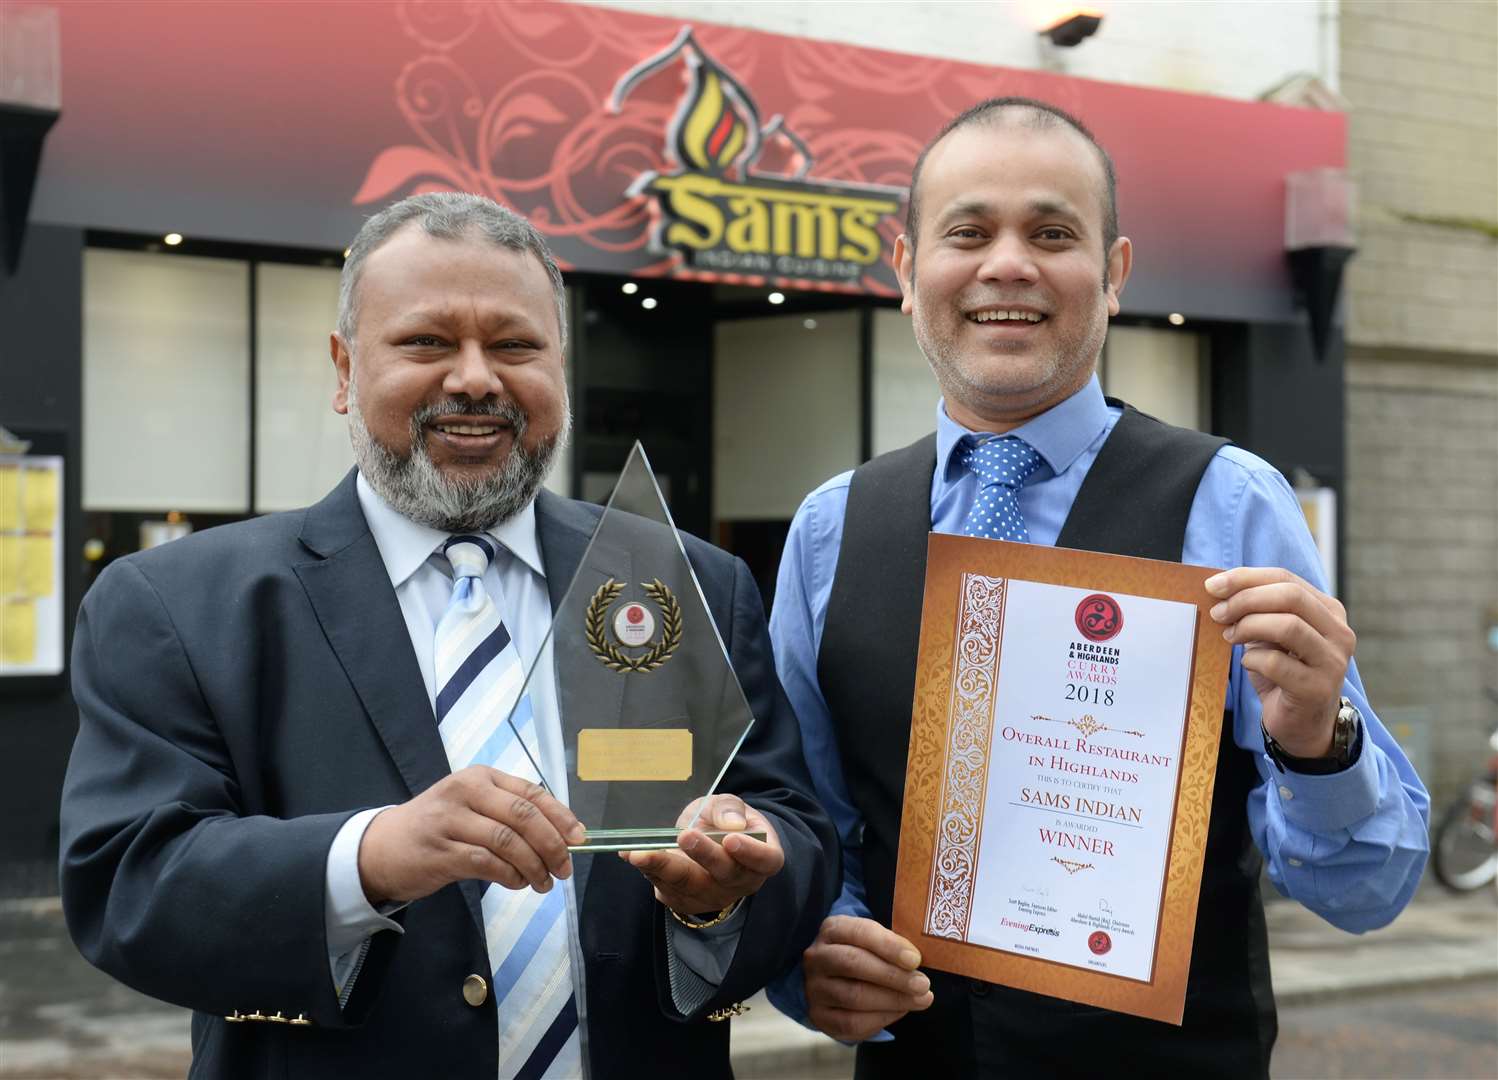 Sam's Indian Restaurant owner Sam Miah (left) and manager Harry Sarwar have an award-winning reputation in the city.